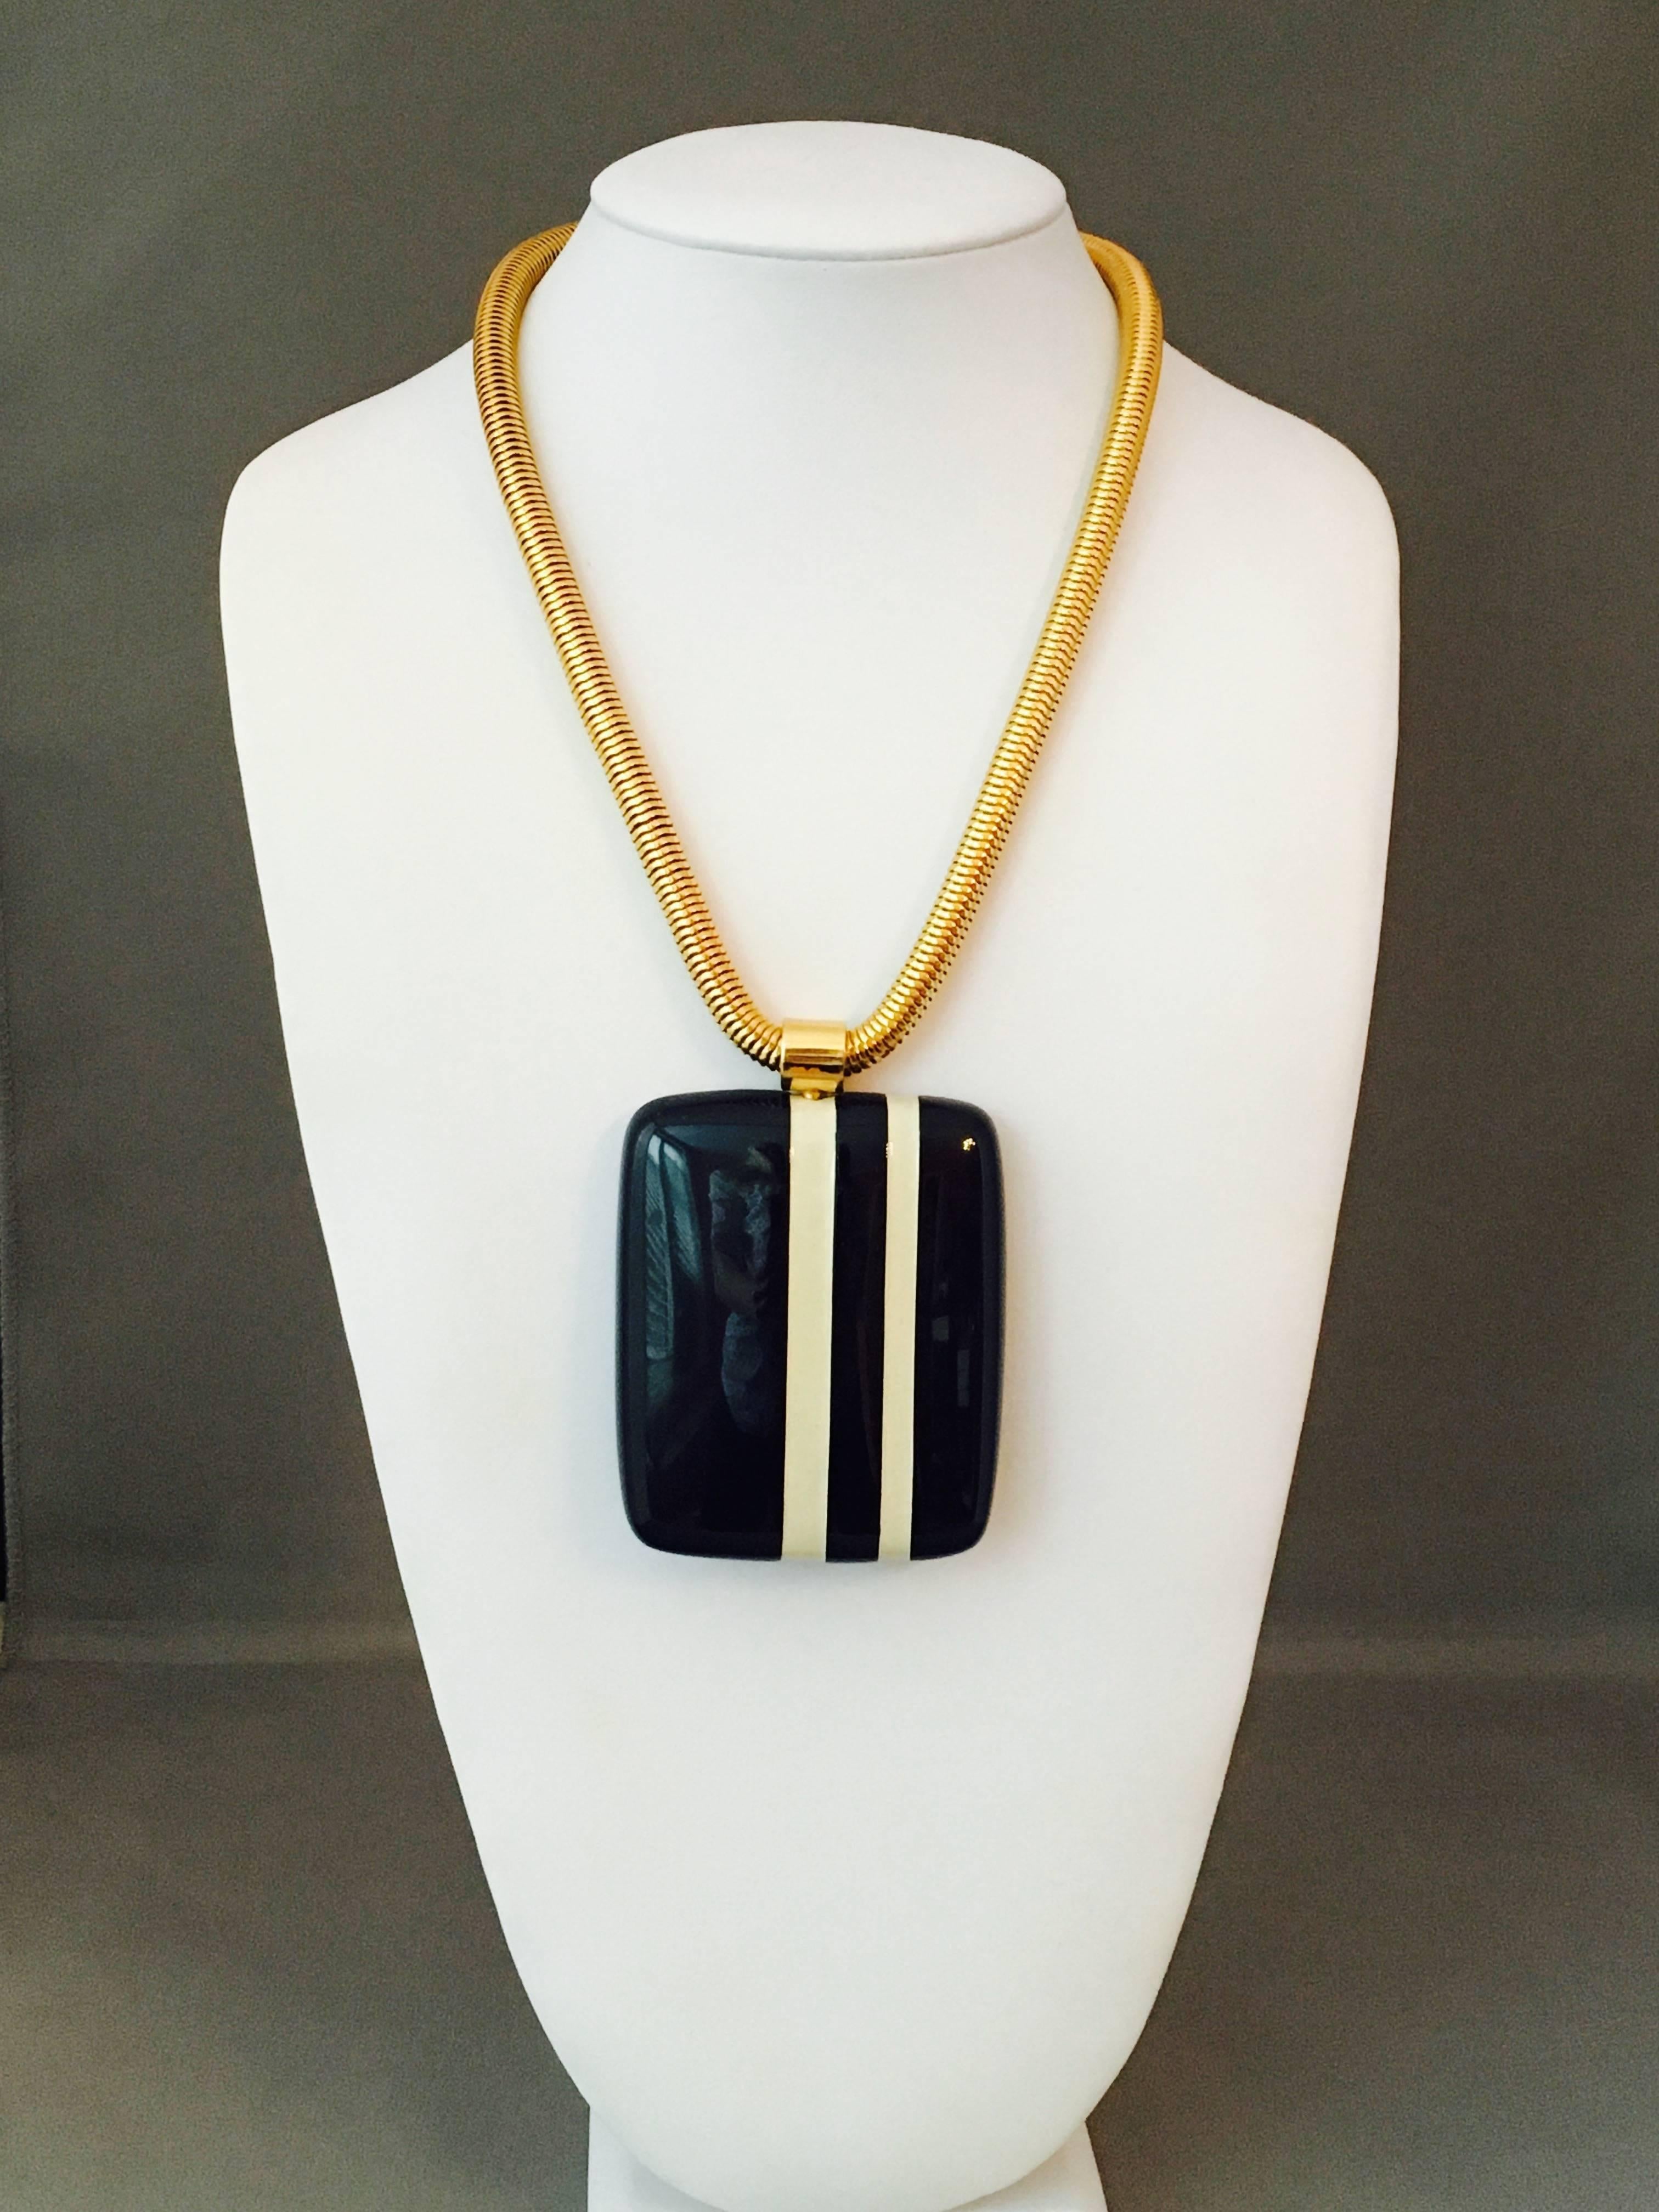 1970s Vintage Lanvin Striped Pendant Necklace and Earrings Navy and White In Excellent Condition For Sale In Chicago, IL